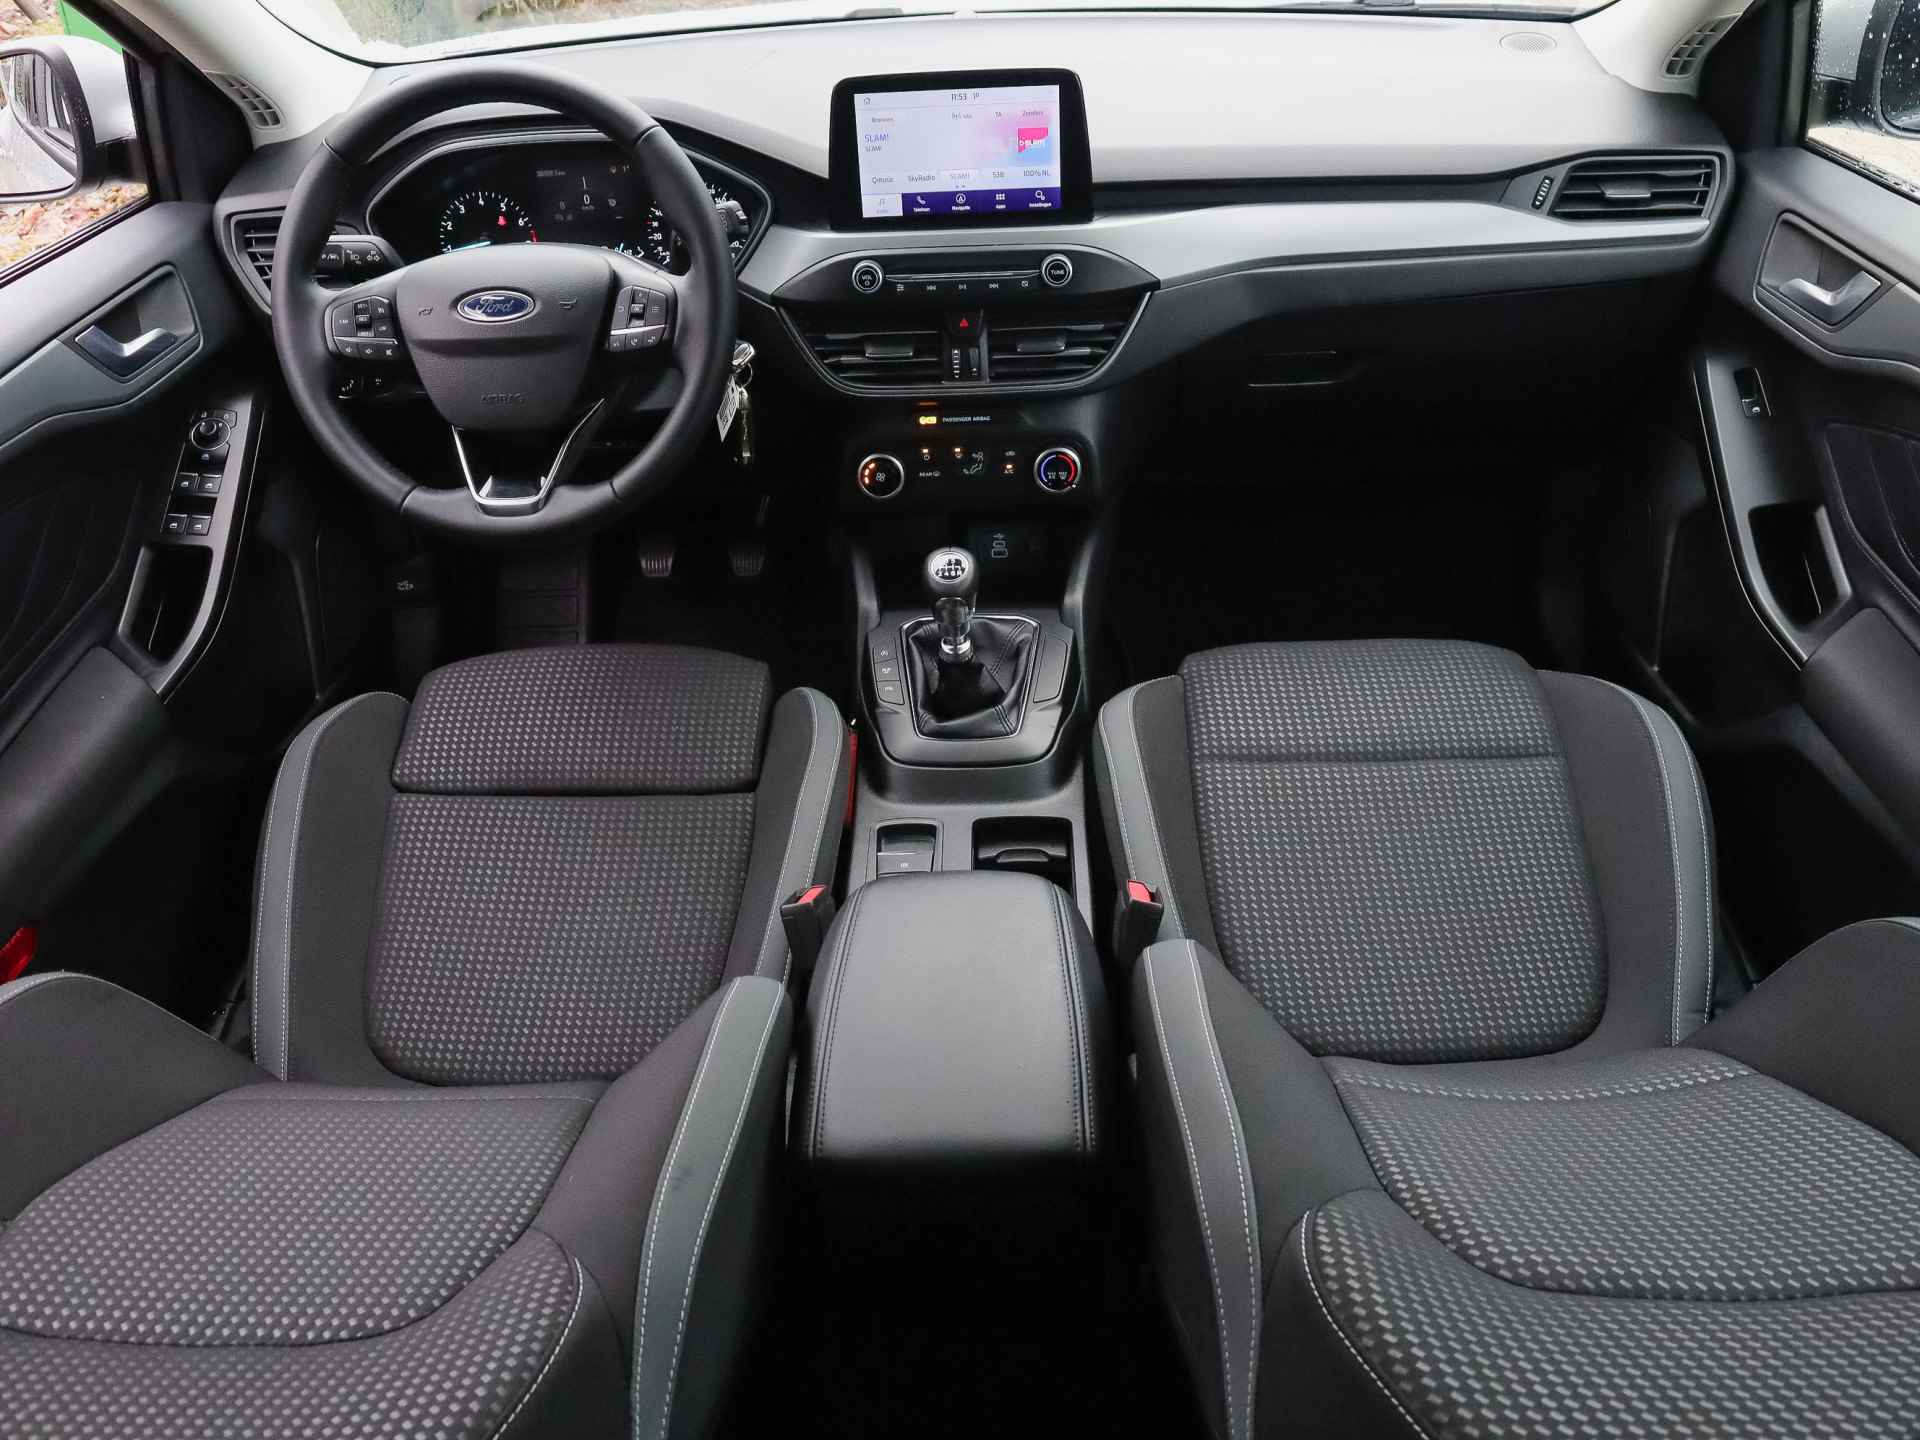 Ford Focus 1.0i Hybrid Connected, (149PK) 1e-Eig, FORD-Dealer-Onderh, 12-Mnd-BOVAG, NL-Auto, Navigatie/Apple-Carplay/Android-Auto, Parkeersensoren-V+A, Cruise-Control, Airco, DAB, Lane-Assist, Privacy-Glas, Sportstoelen, Led-Koplampen, Adaptieve-Cruise-Control - 3/54